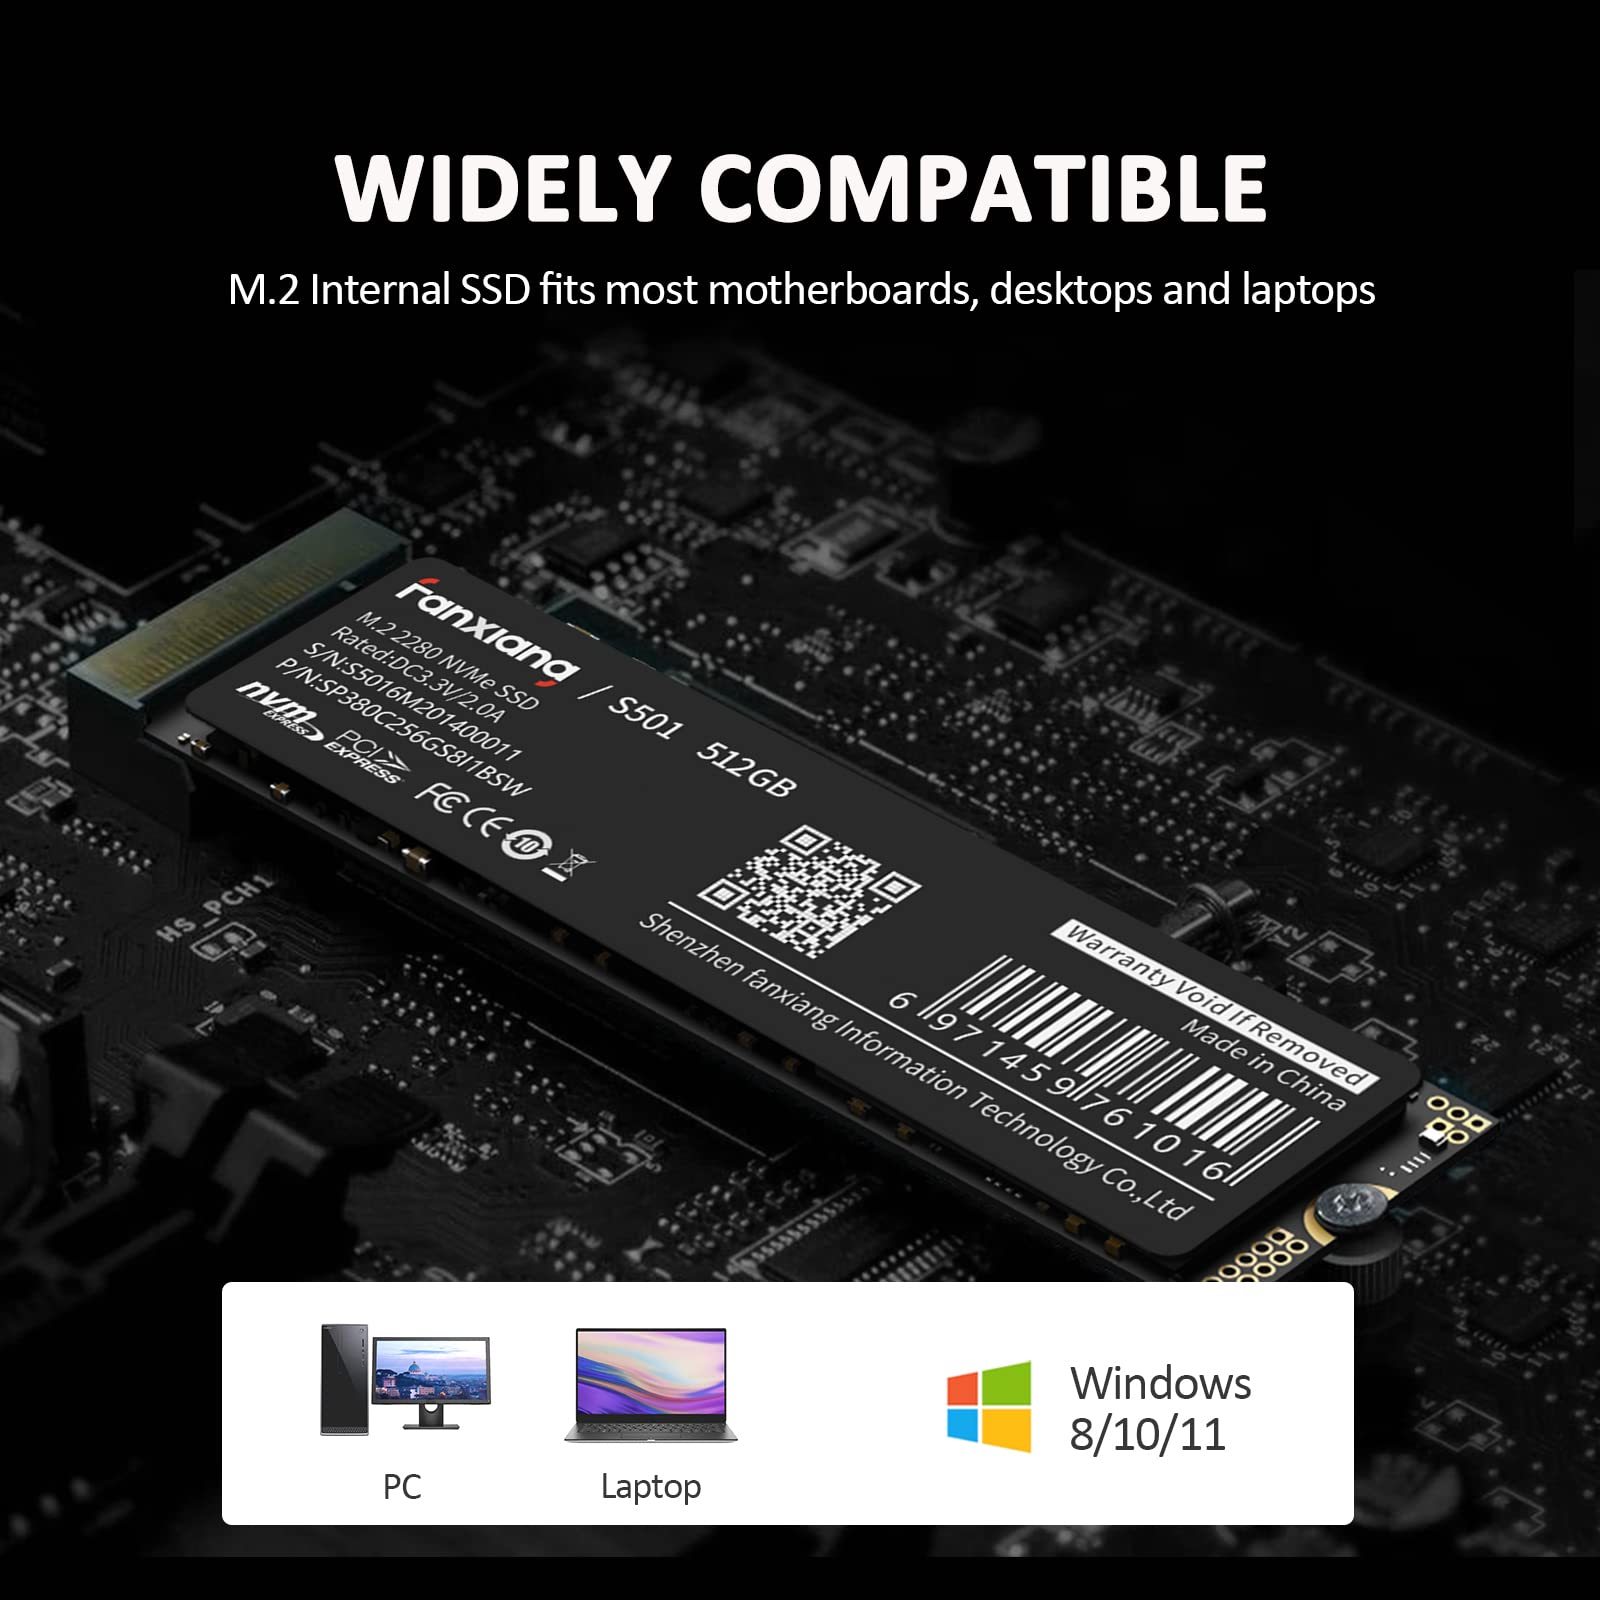 fanxiang S501 512GB NVMe SSD 3D NAND1.3 PCIe Gen3x4 M.2 2280 Internal Solid State Drive (Read/Write Speed up to 2,150/1,600 MB/s) Compatible with Laptop & PC Desktop